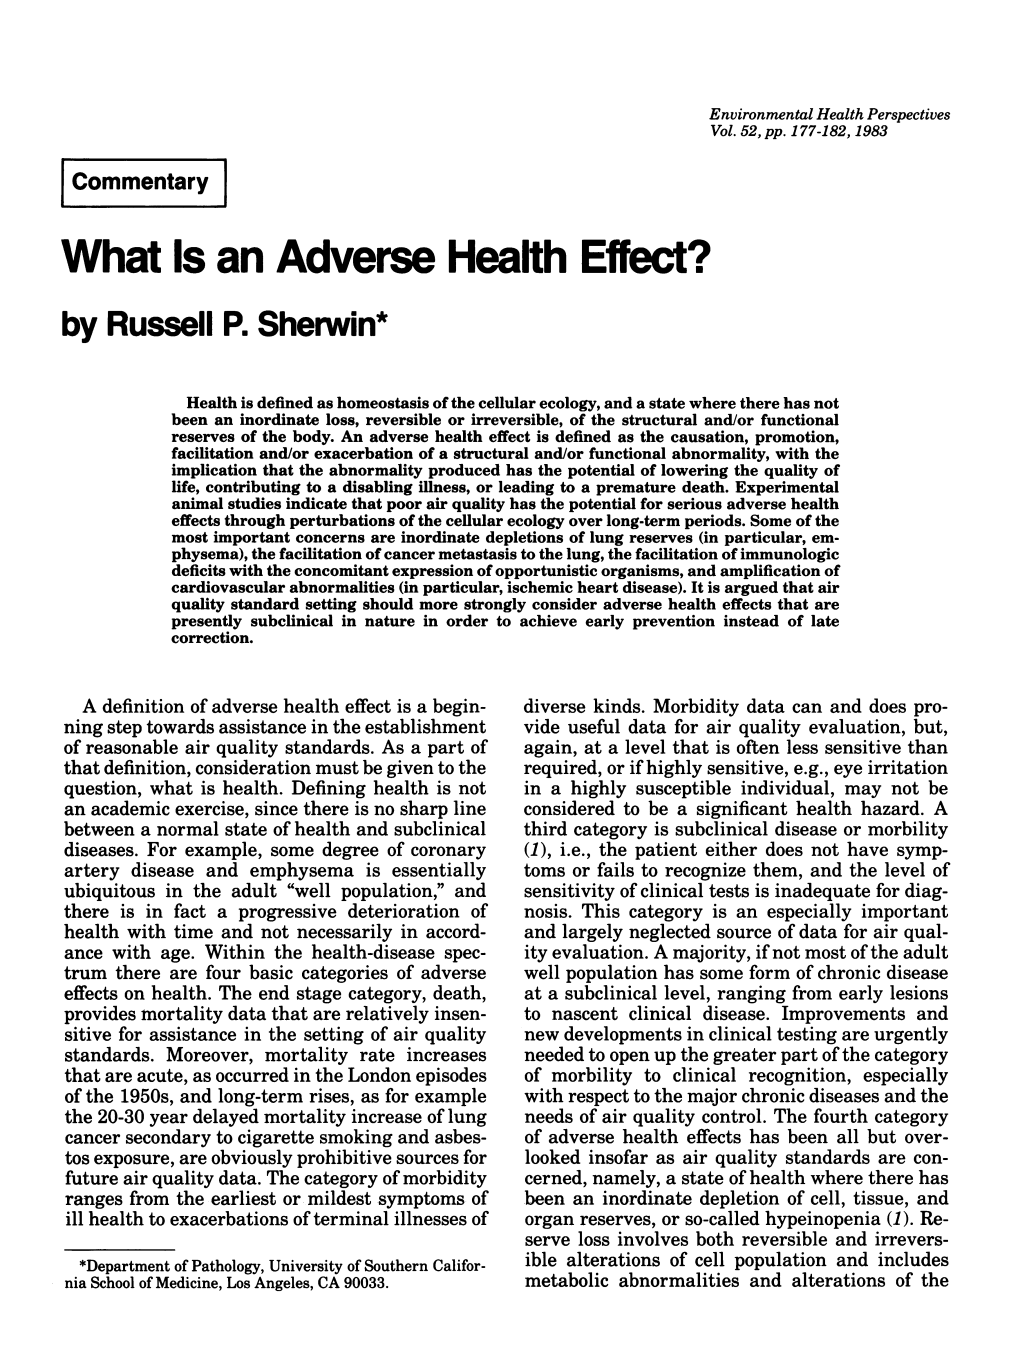 What Is an Adverse Health Effect? by Russell P